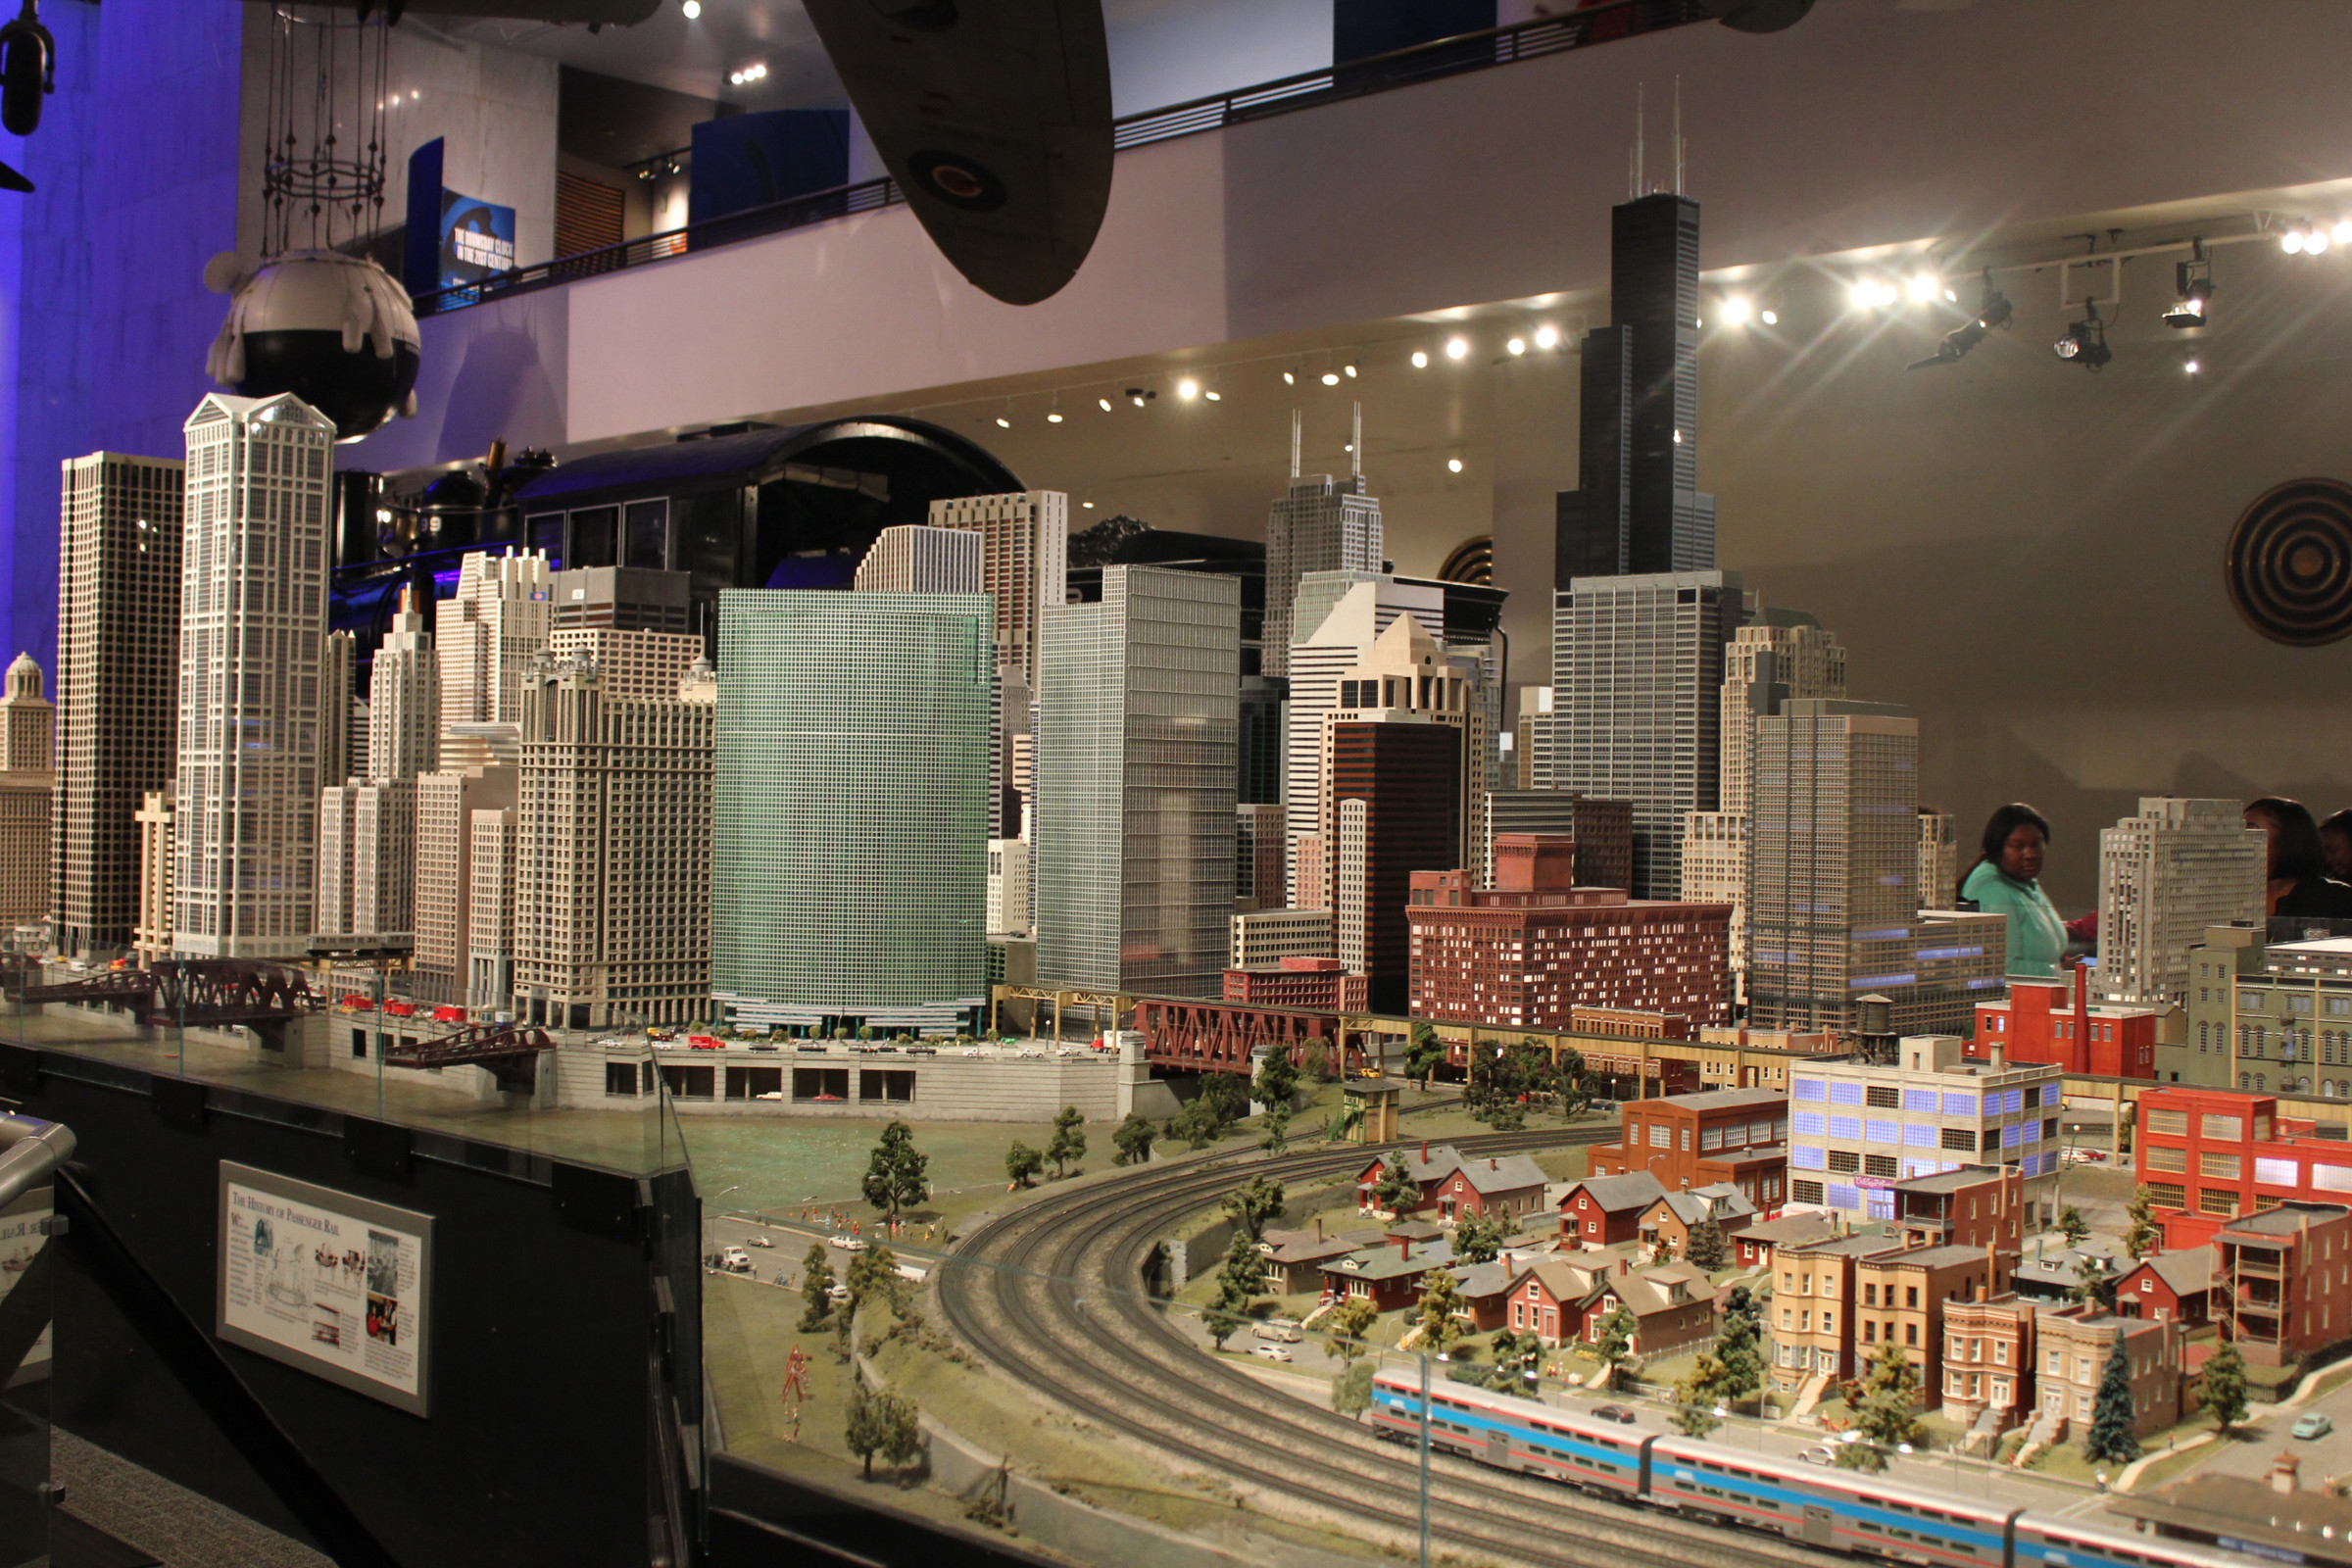 9151355 Museum Of Science  Industry  Chicago Model Train 0 